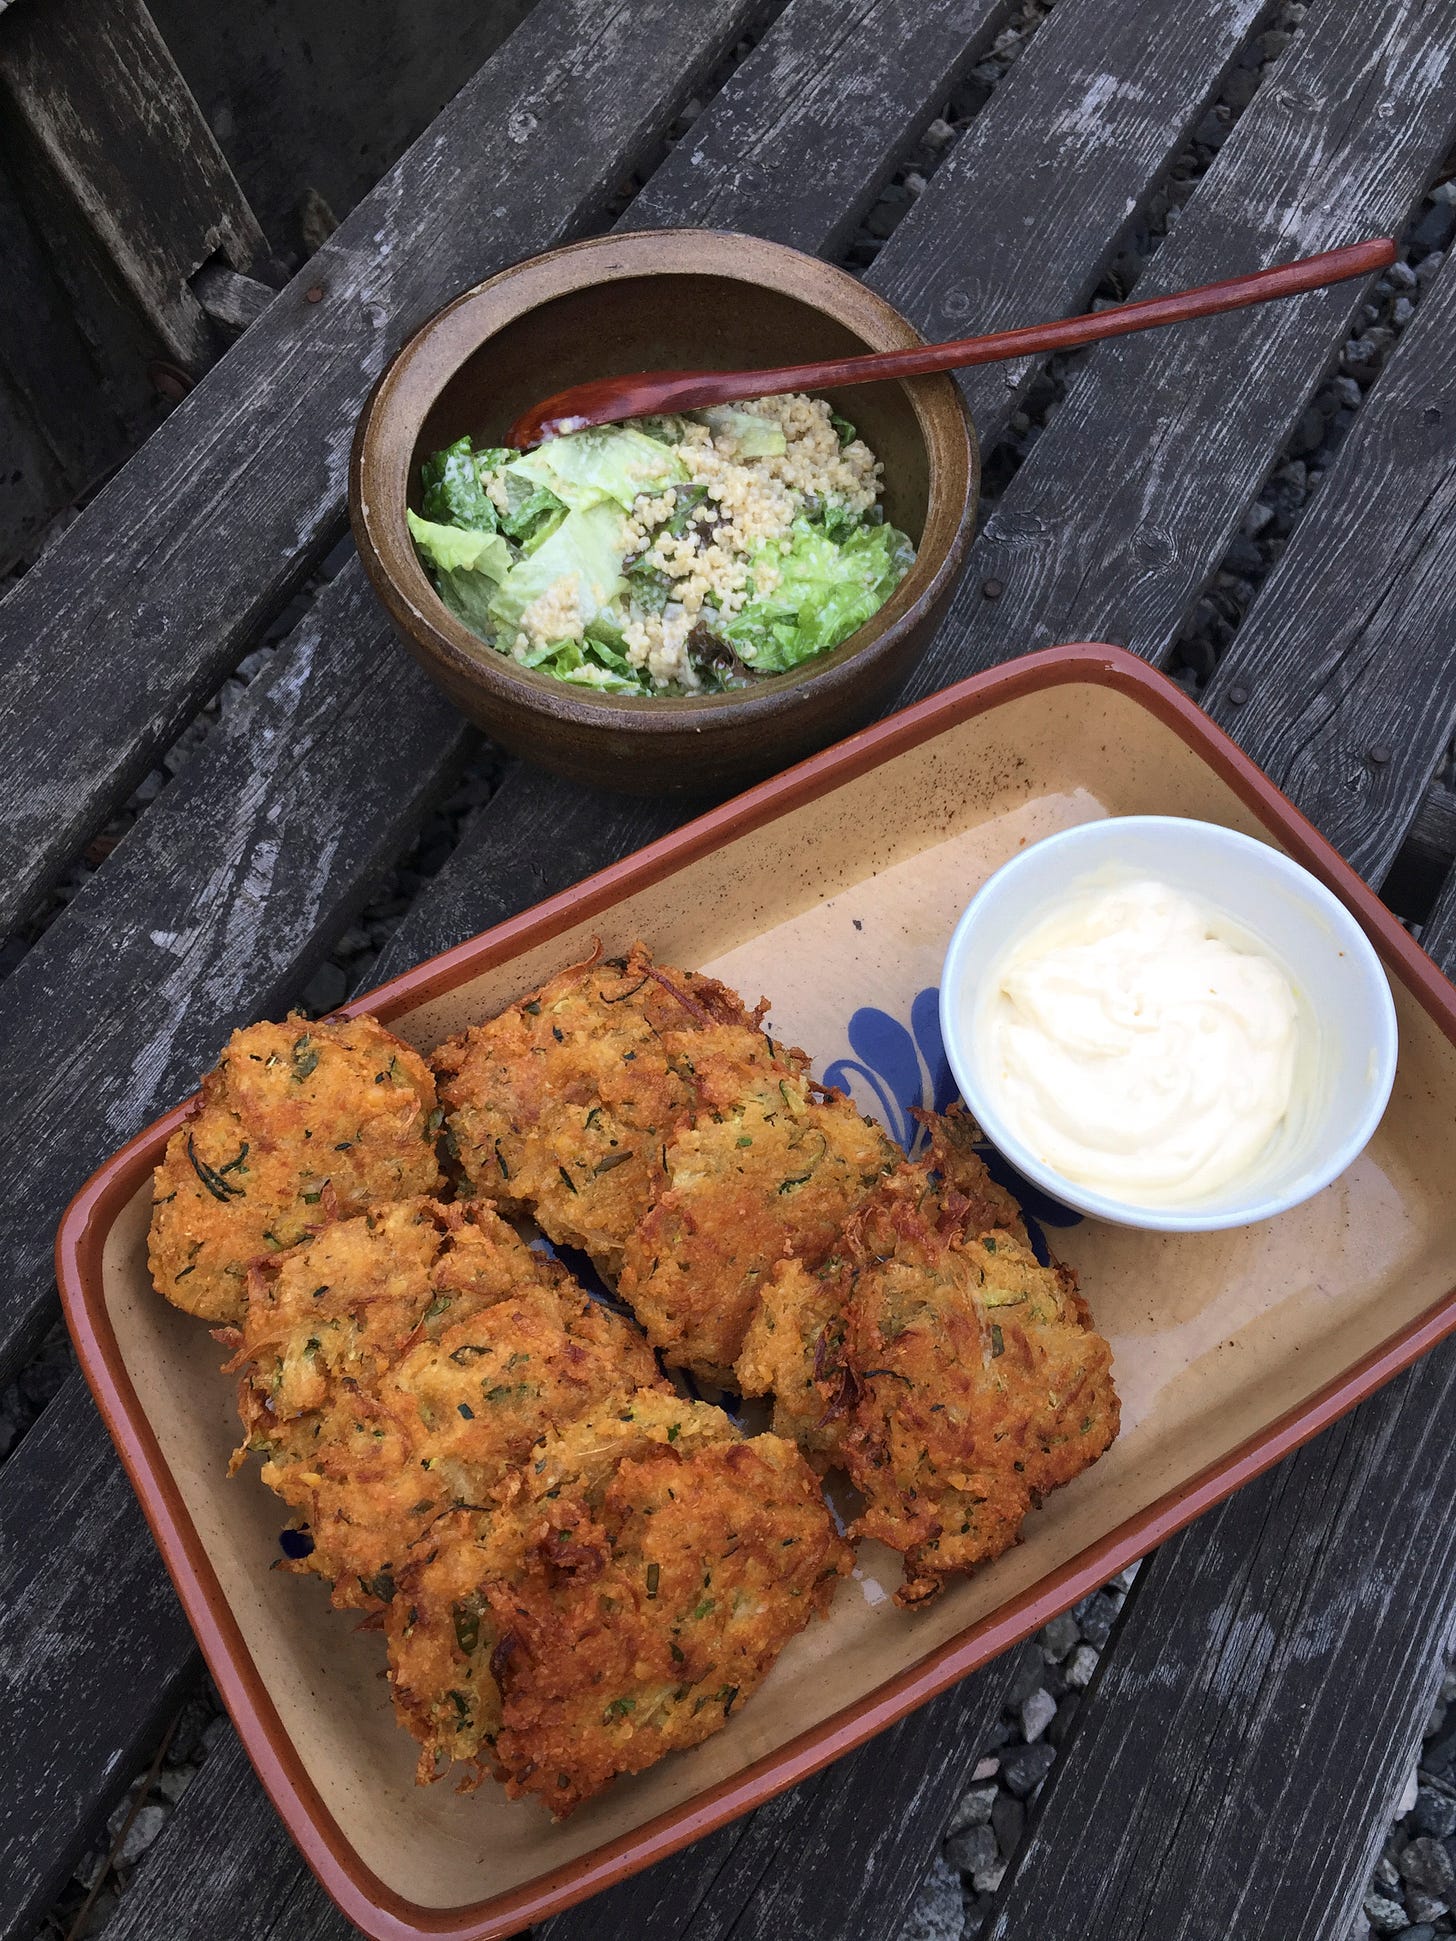 On a wooden bench, a rectangular dish full of golden-brown fritters, next to a small white dish of the lemon mayo. Behind it is a small stone bowl of quinoa Caesar salad.